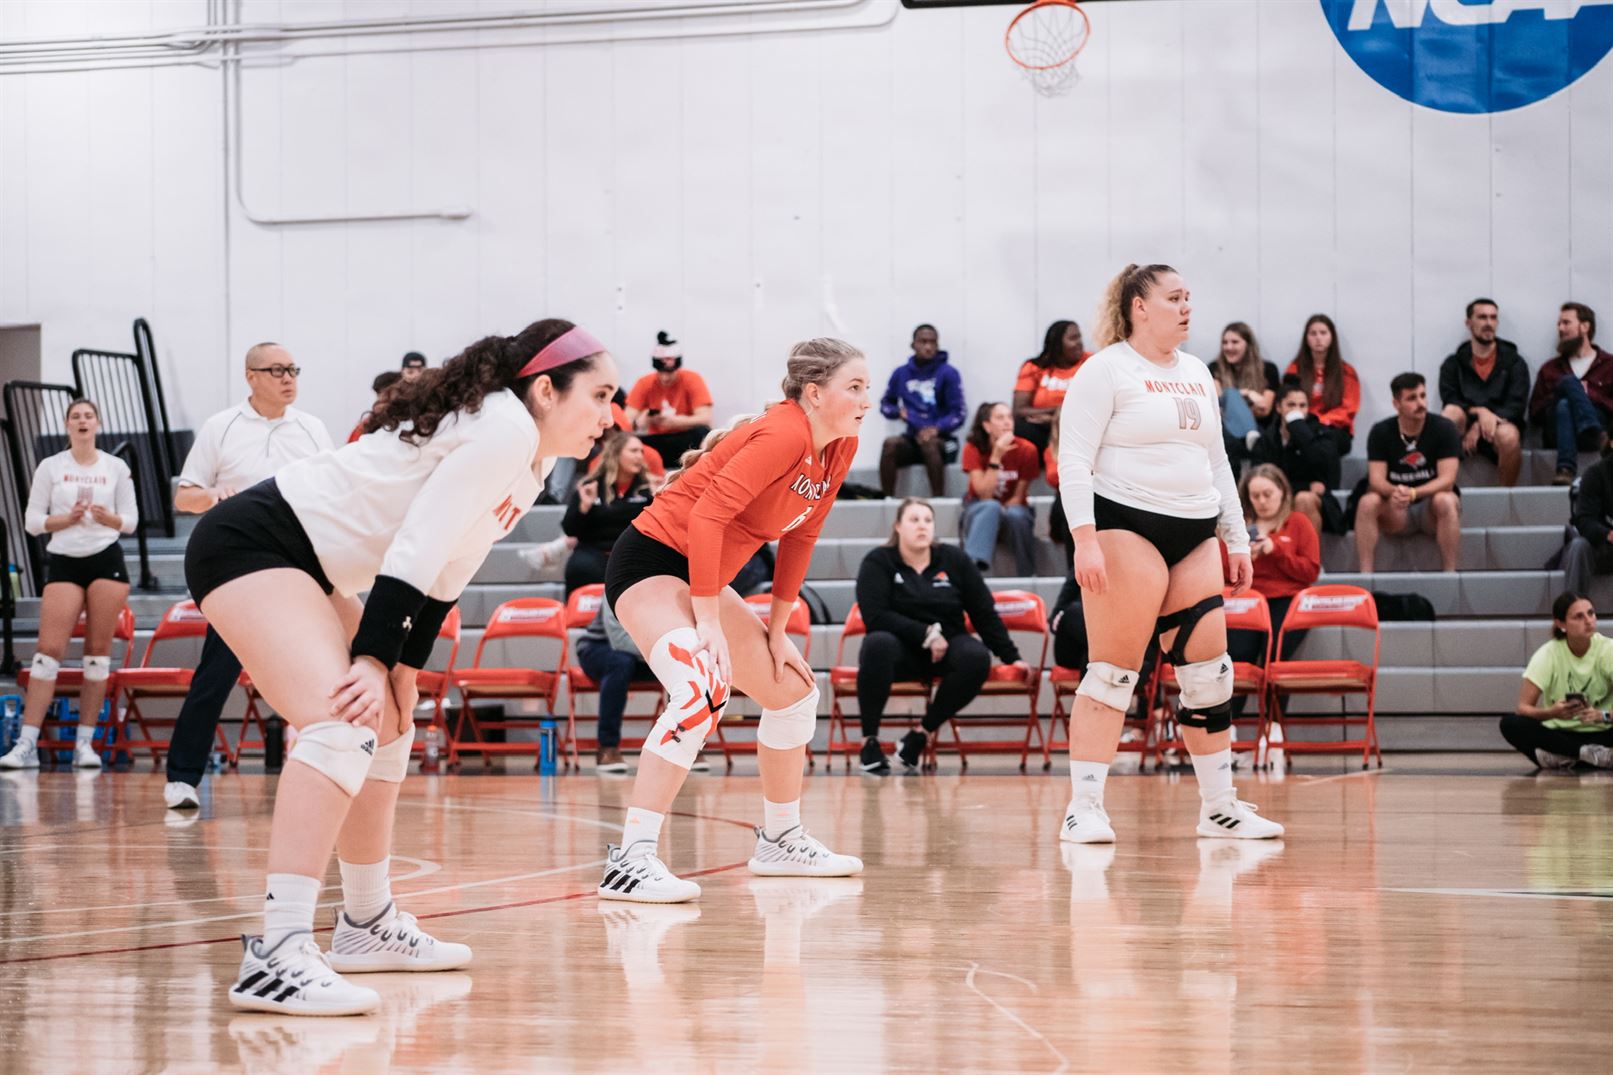 Graduate student outside hitter Carly Waterman got ten kills in this match, helping Montclair State to victory. Dan Dreisbach | The Montclarion